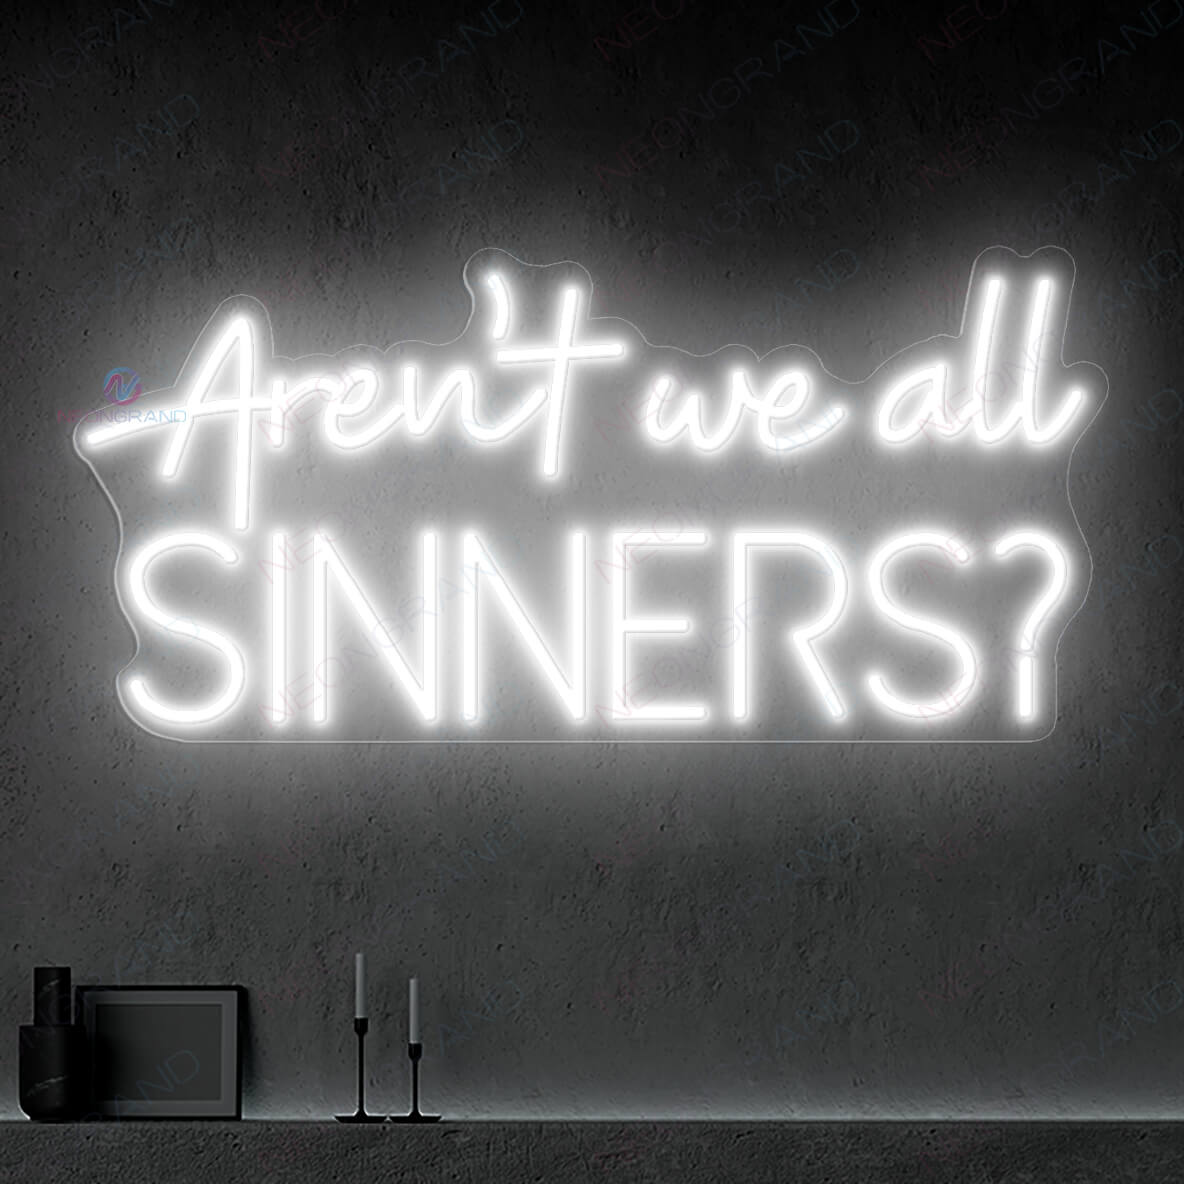 Aren't We All Sinners Neon Sign Welcome Led Light white